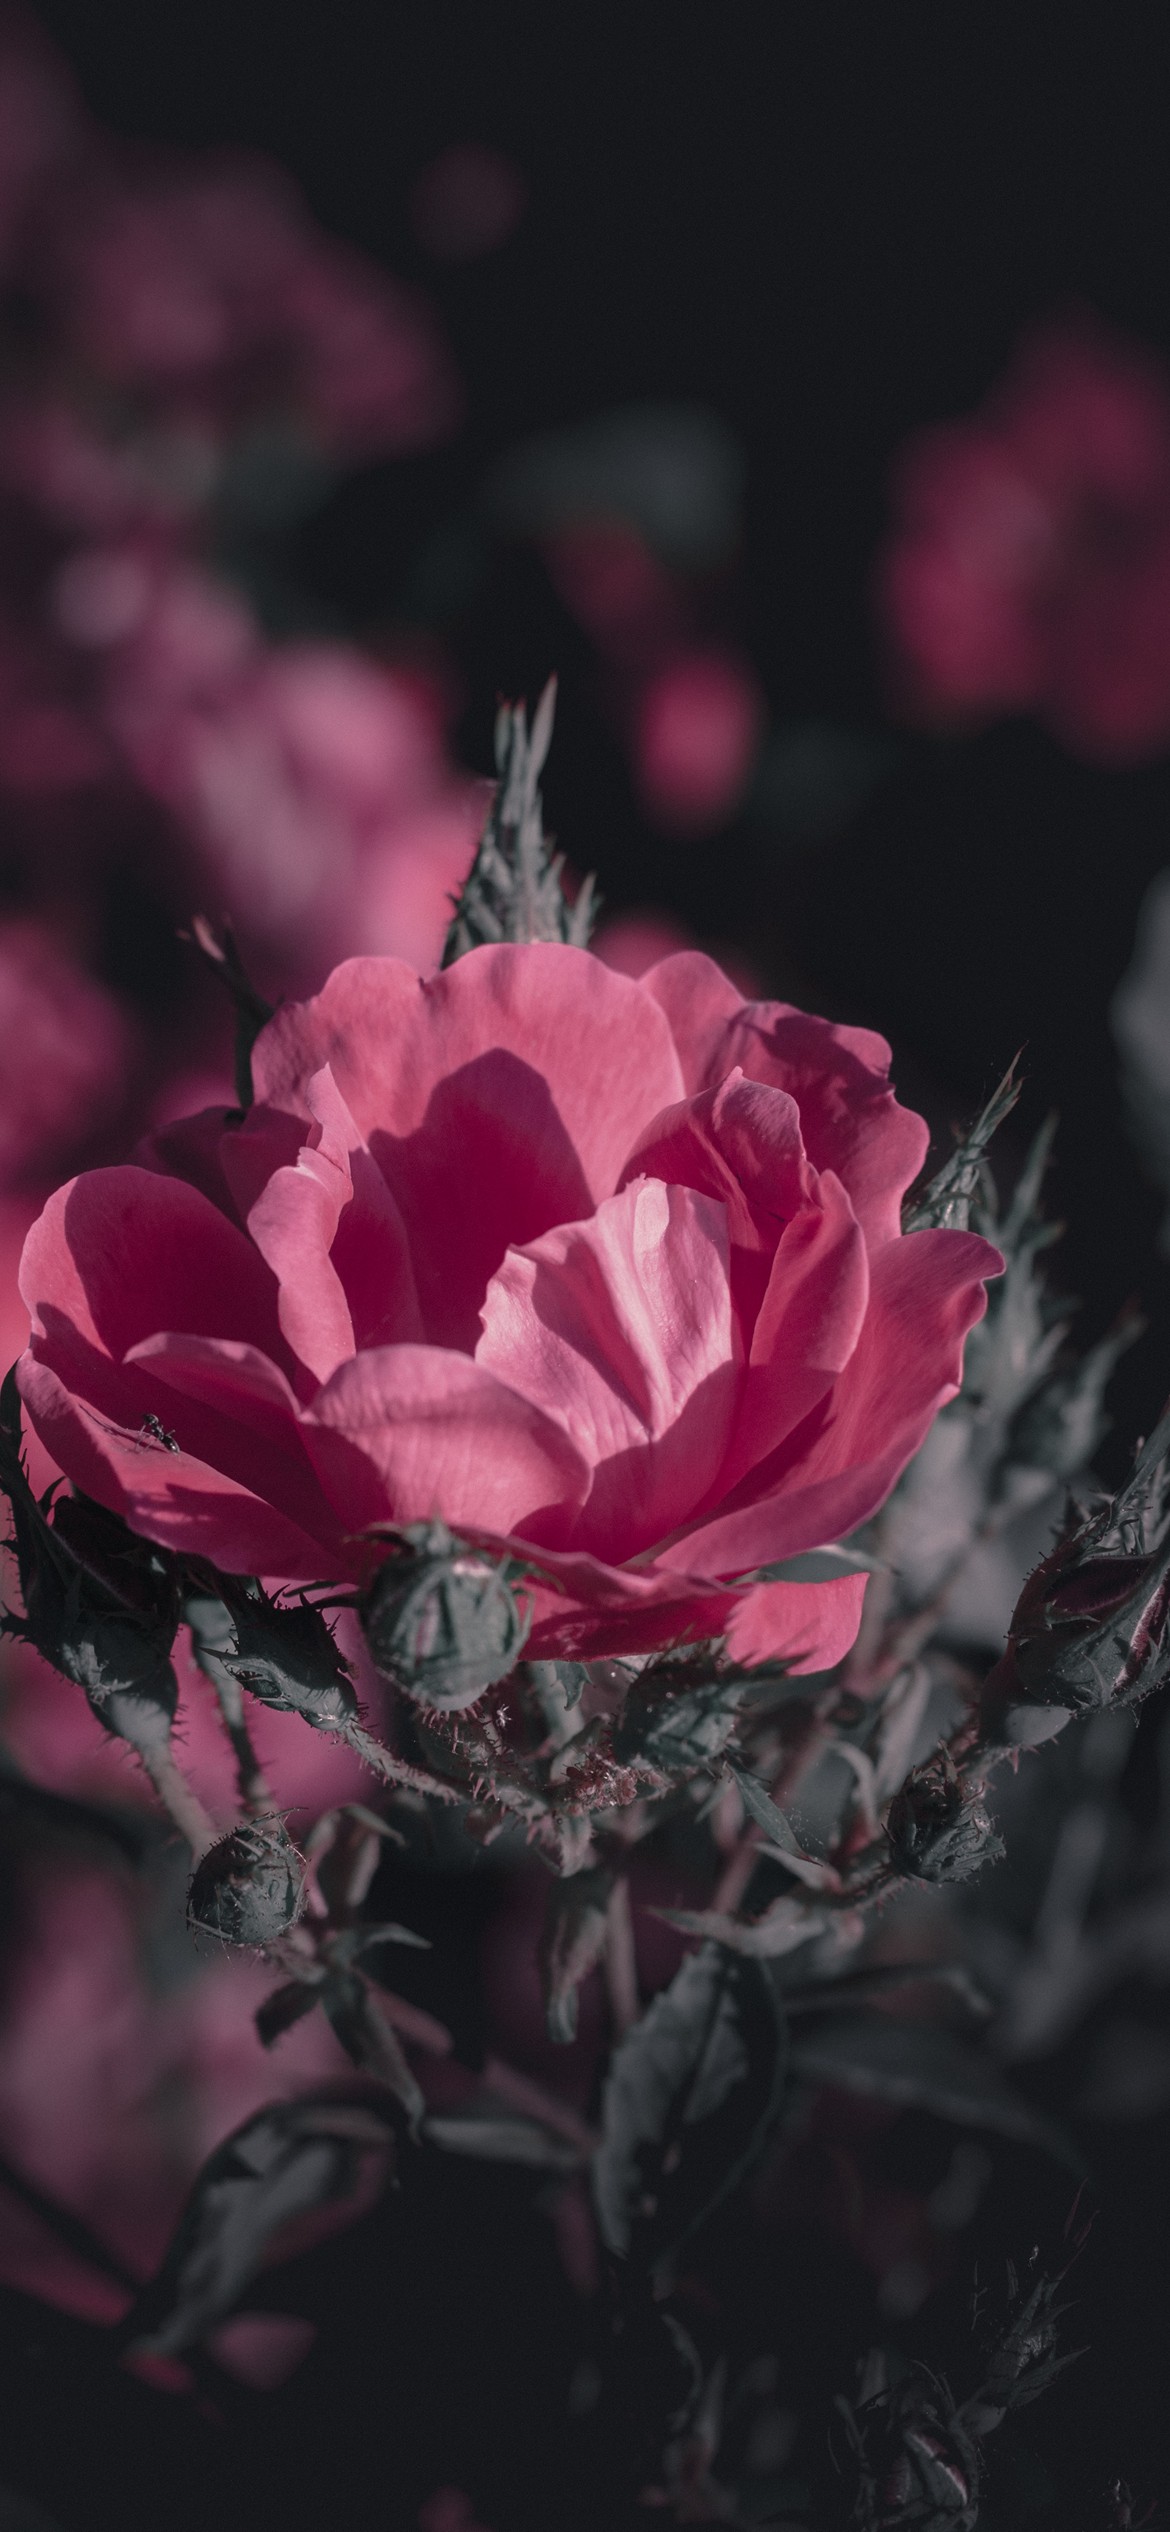 Natural Rose Flower On Background Blurry Pink Roses In The Garden Photo |  JPG Free Download - Pikbest